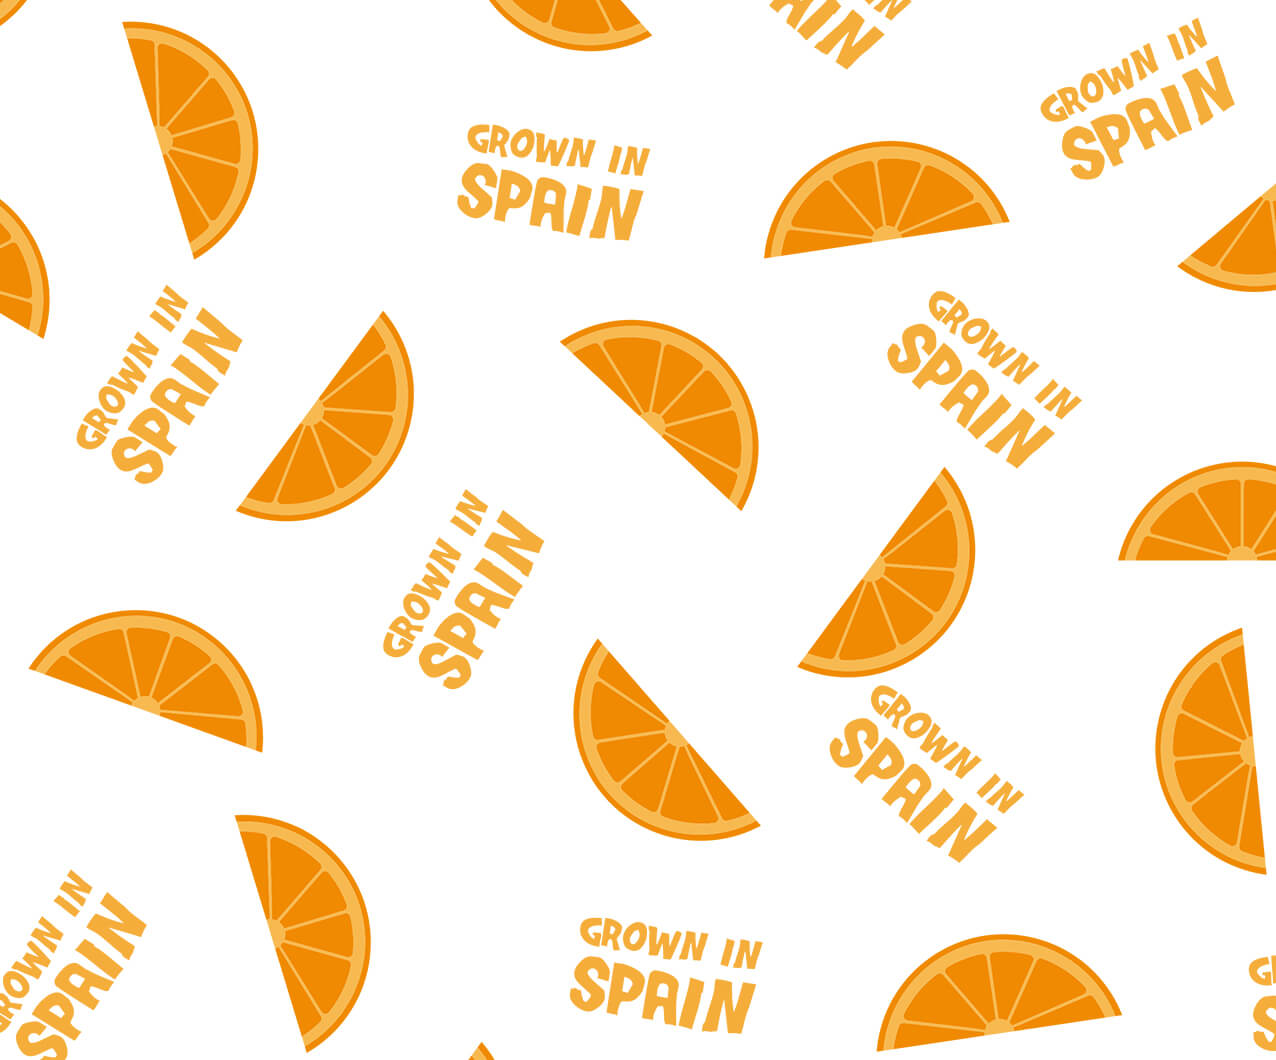 Pattern created using repeat orange slices and grown in Spain text